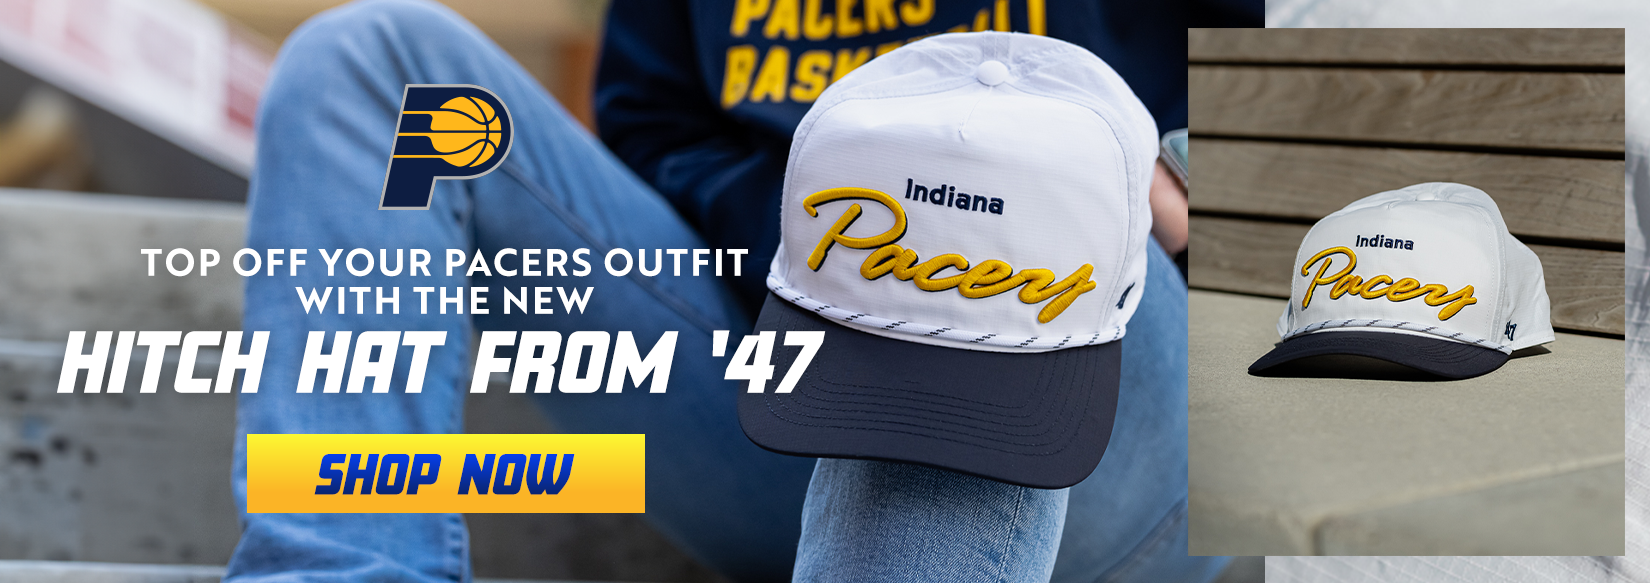 PACERS TEAM STORE - 125 S Pennsylvania St, Indianapolis, Indiana -  Accessories - Phone Number - Yelp